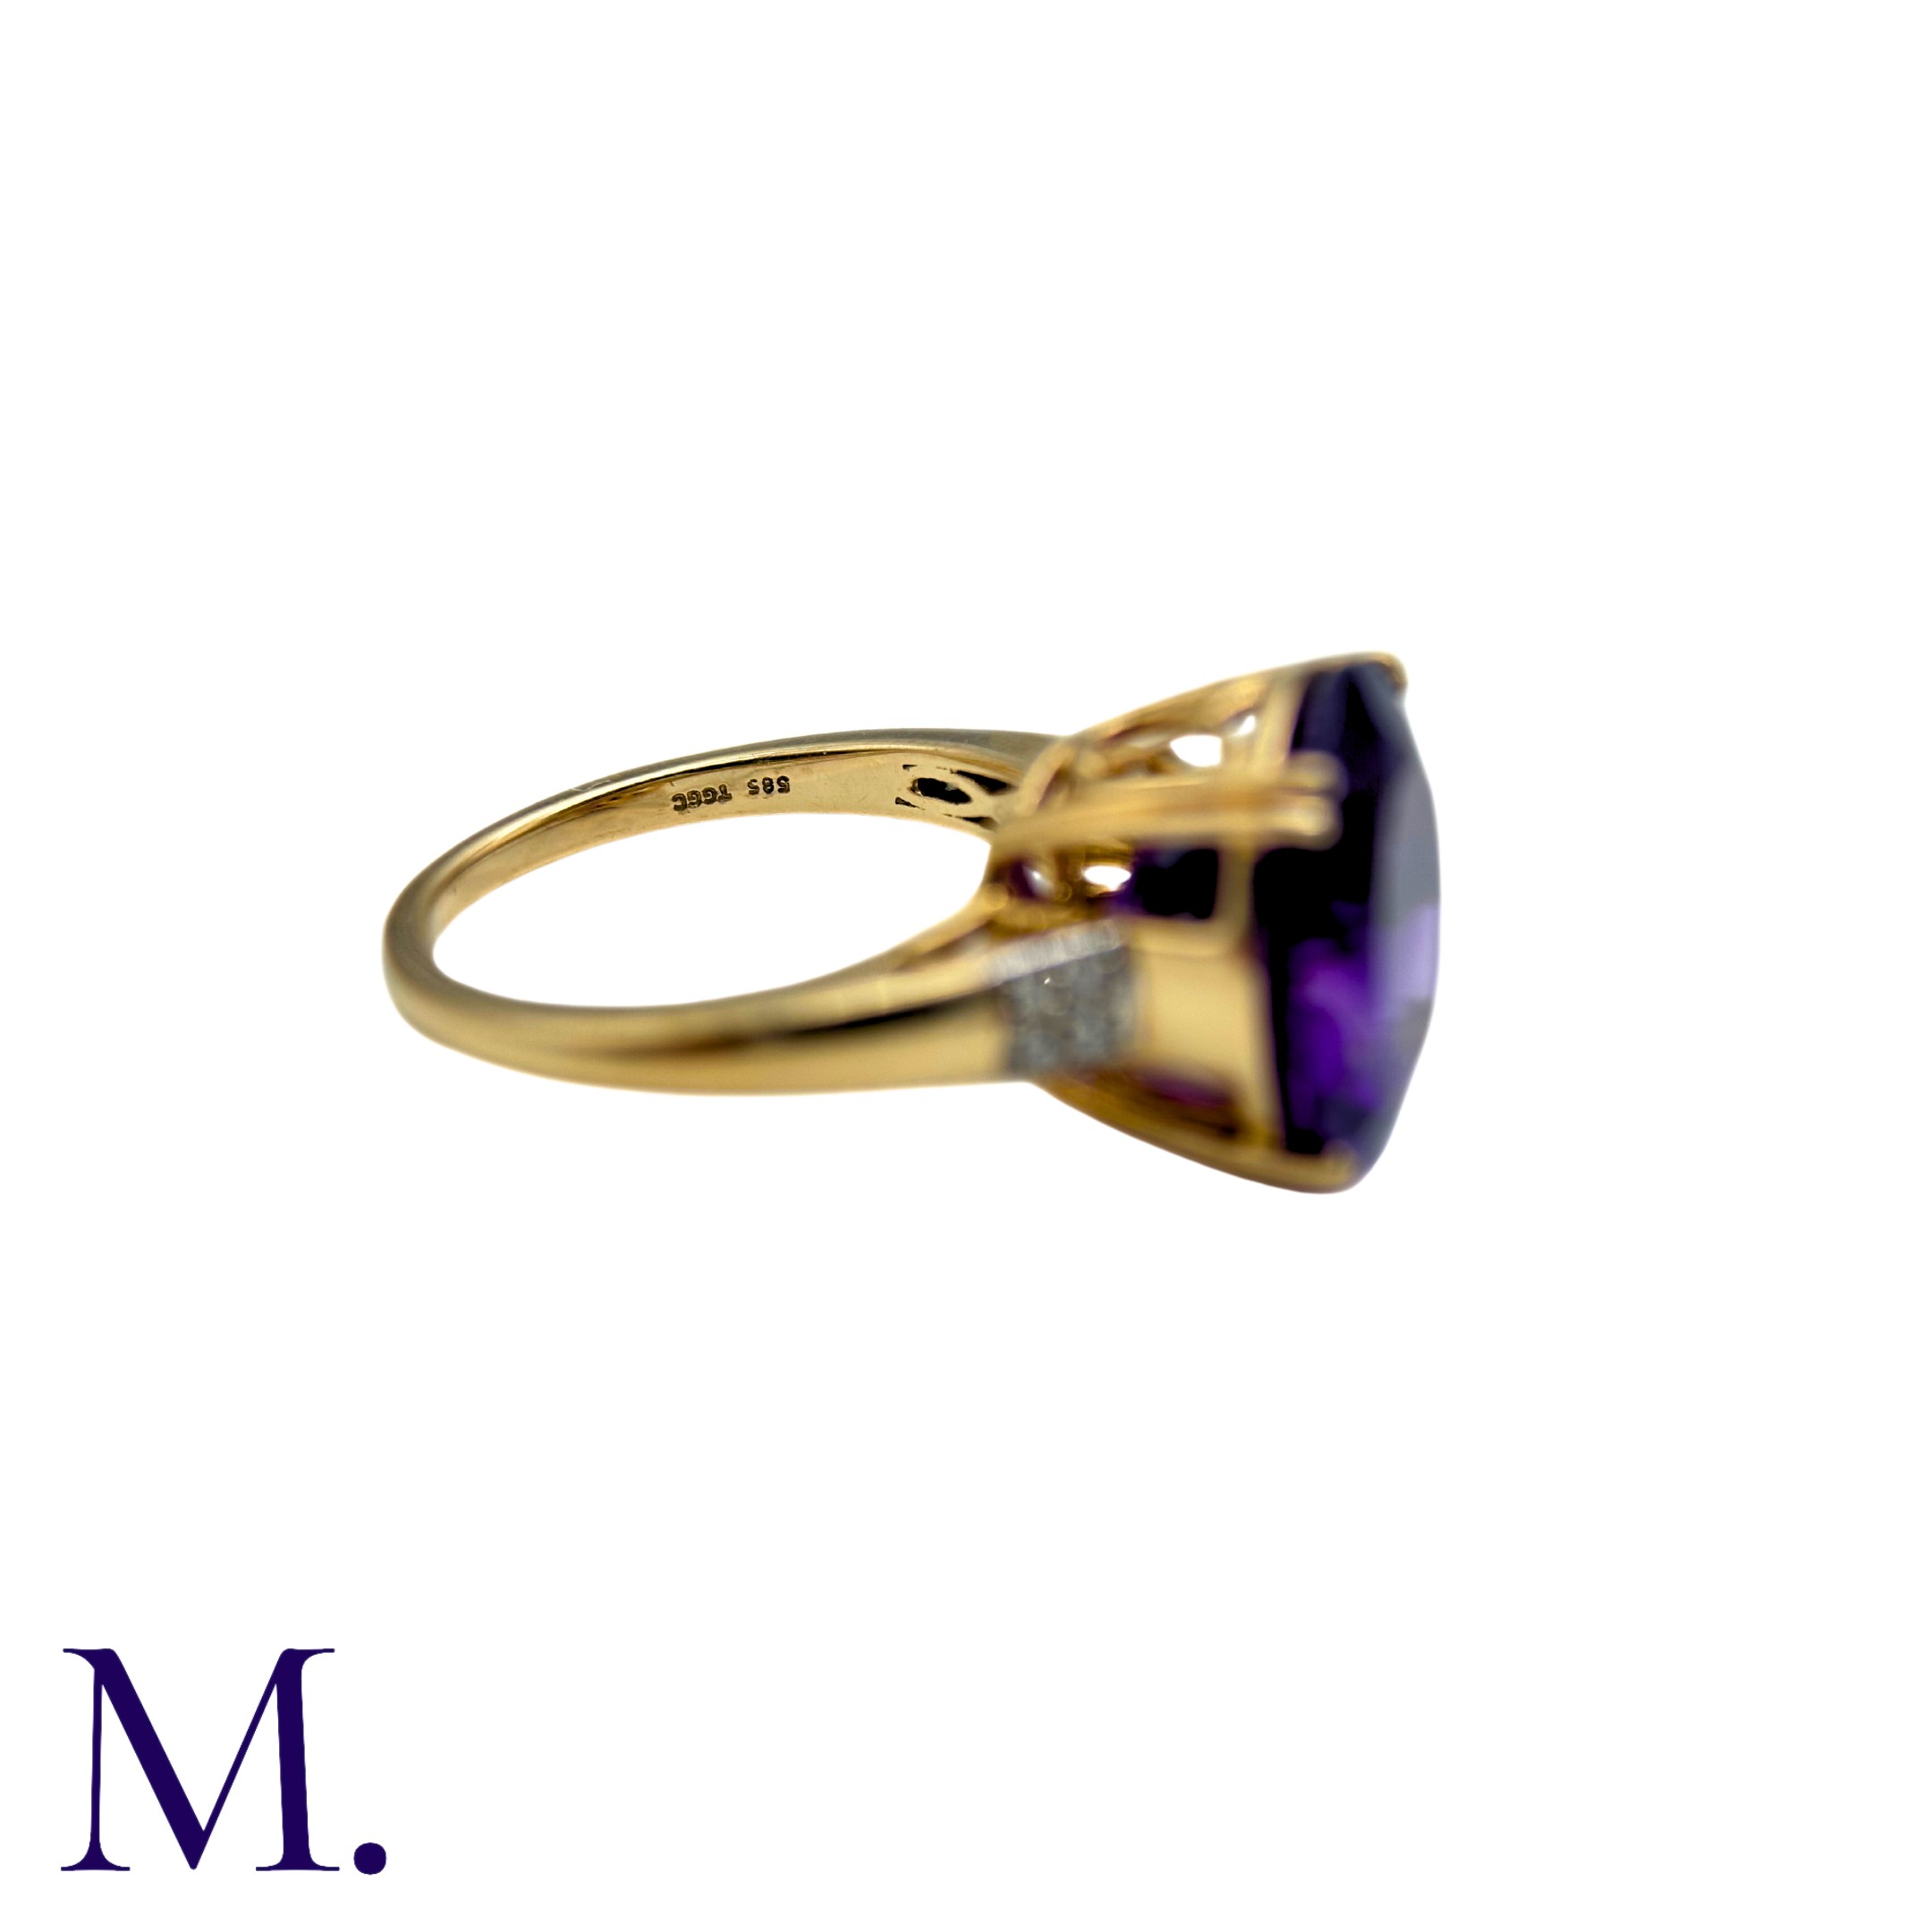 An Amethyst And Diamond Ring in 14k yellow gold, set with a principal round cut amethyst of - Image 4 of 5